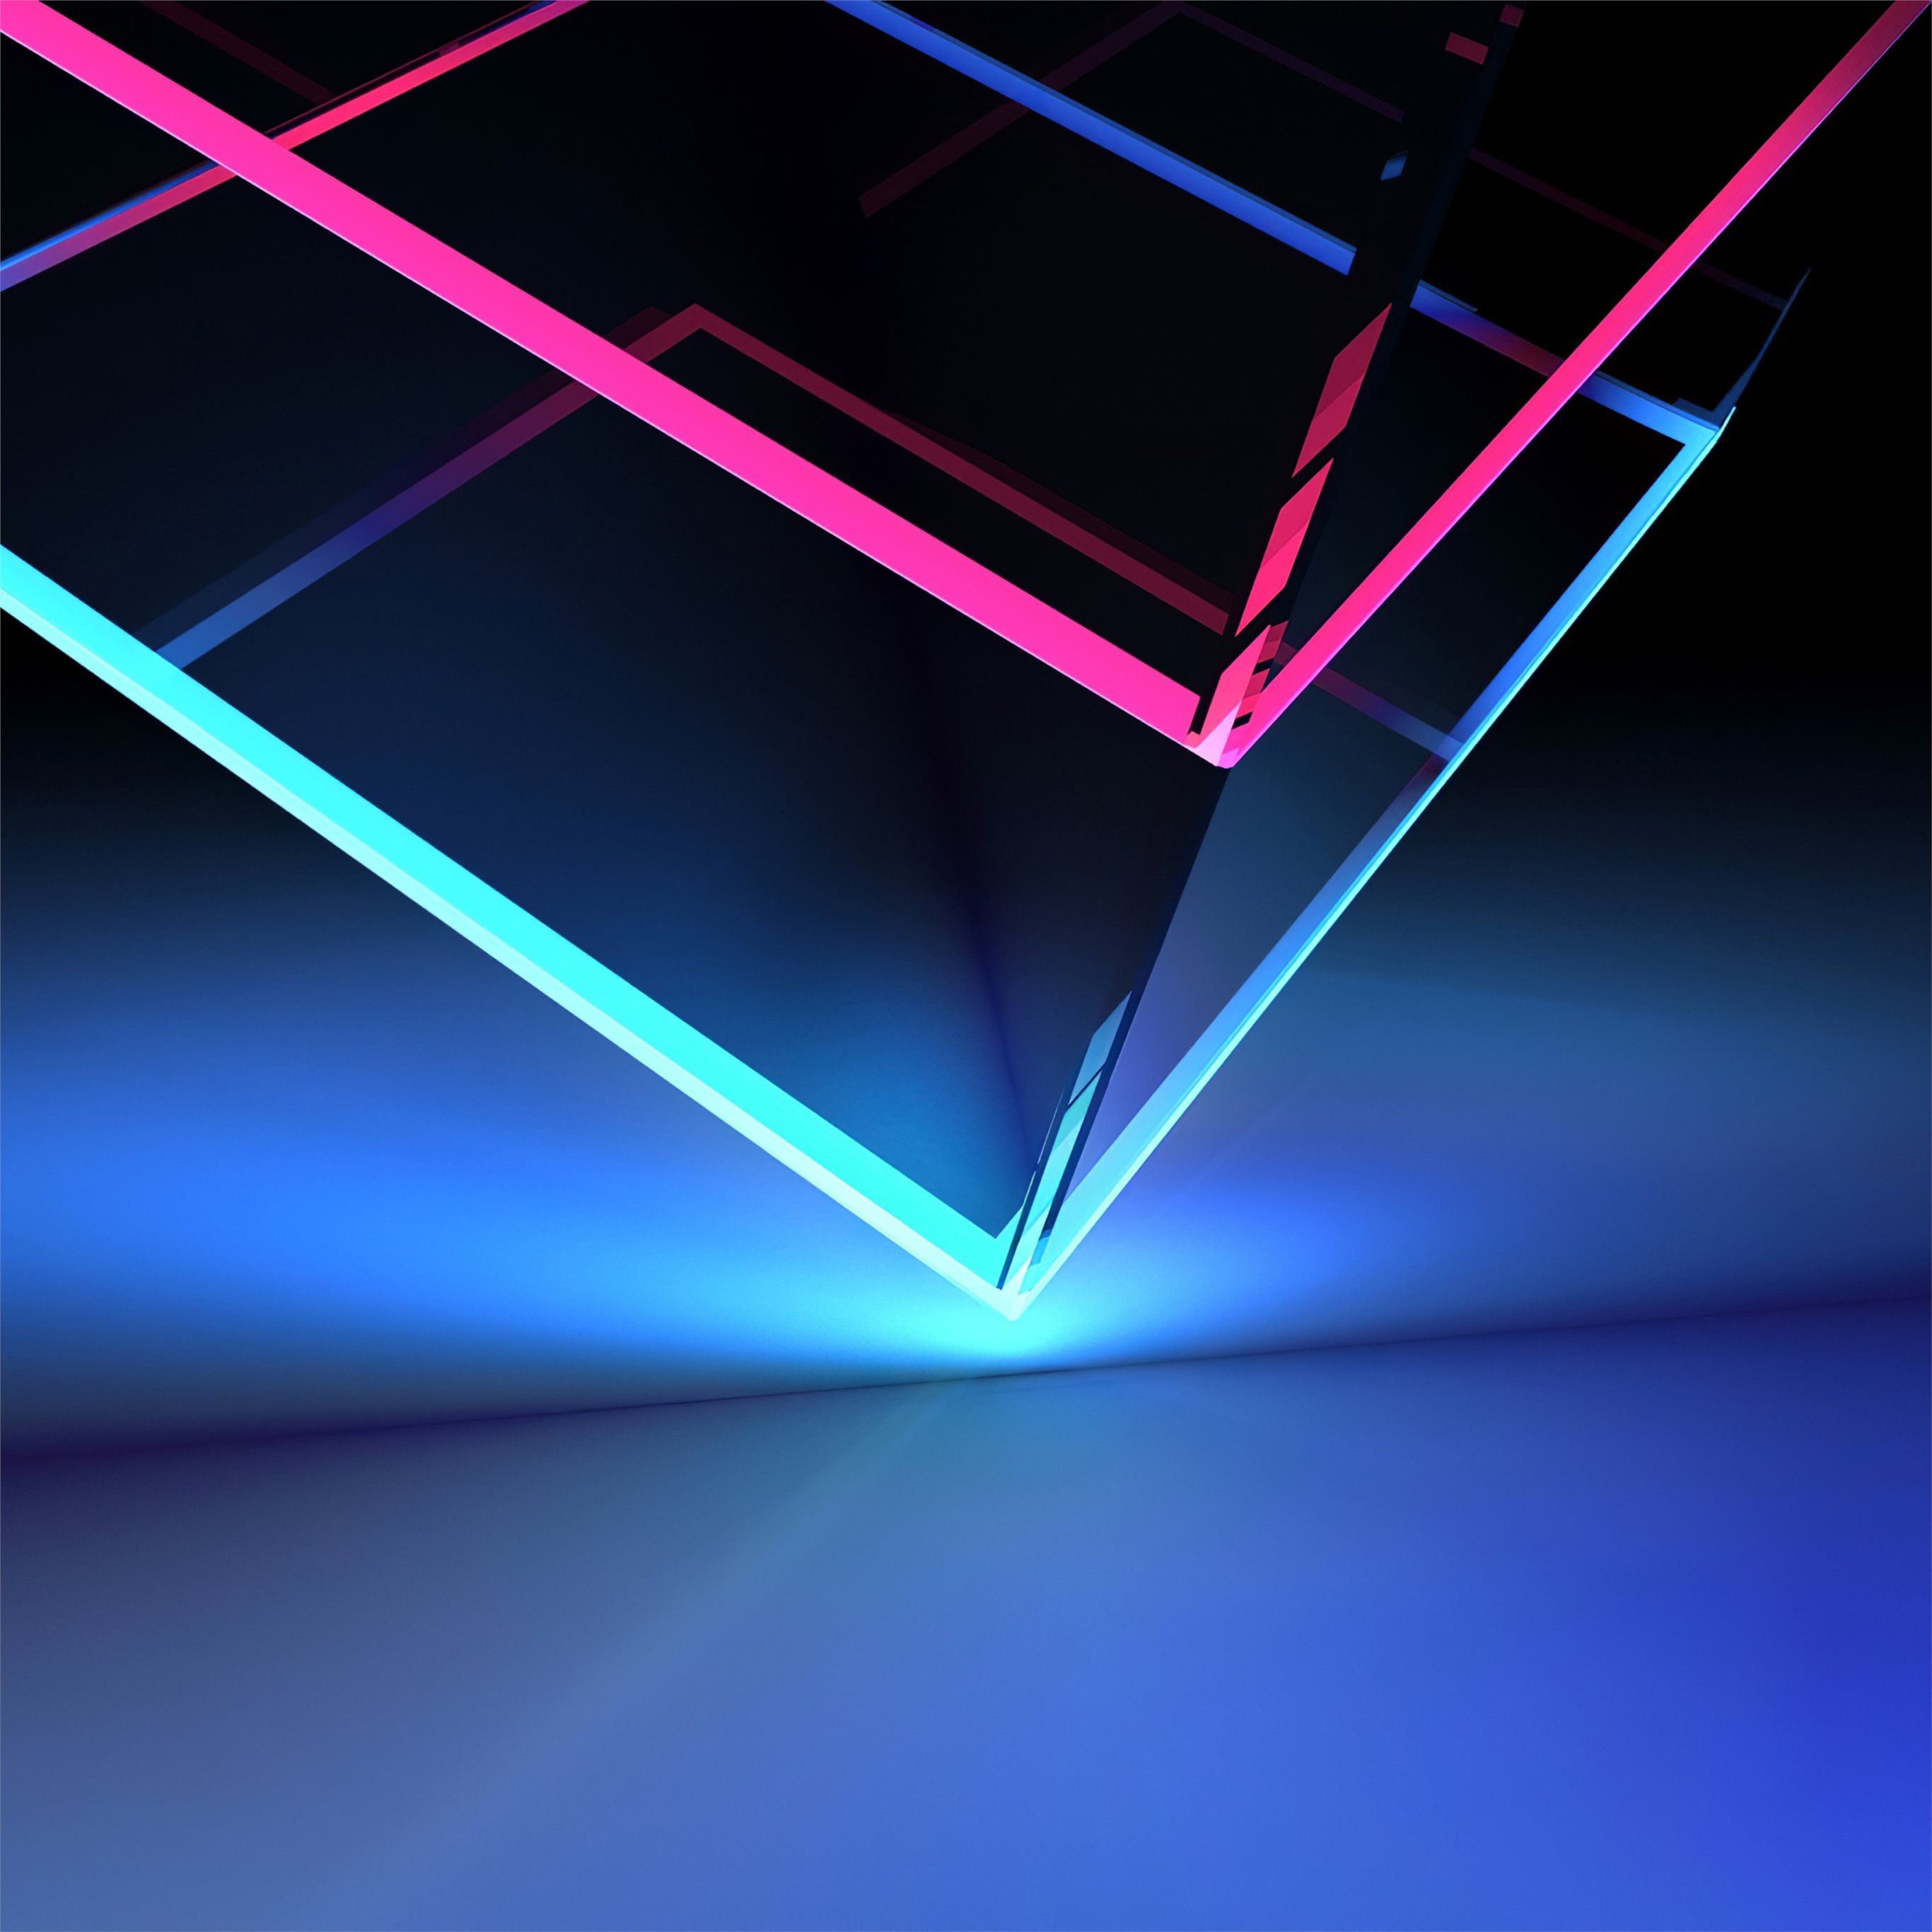 neon cube abstract shapes 4k iPad Pro Wallpapers Free Download